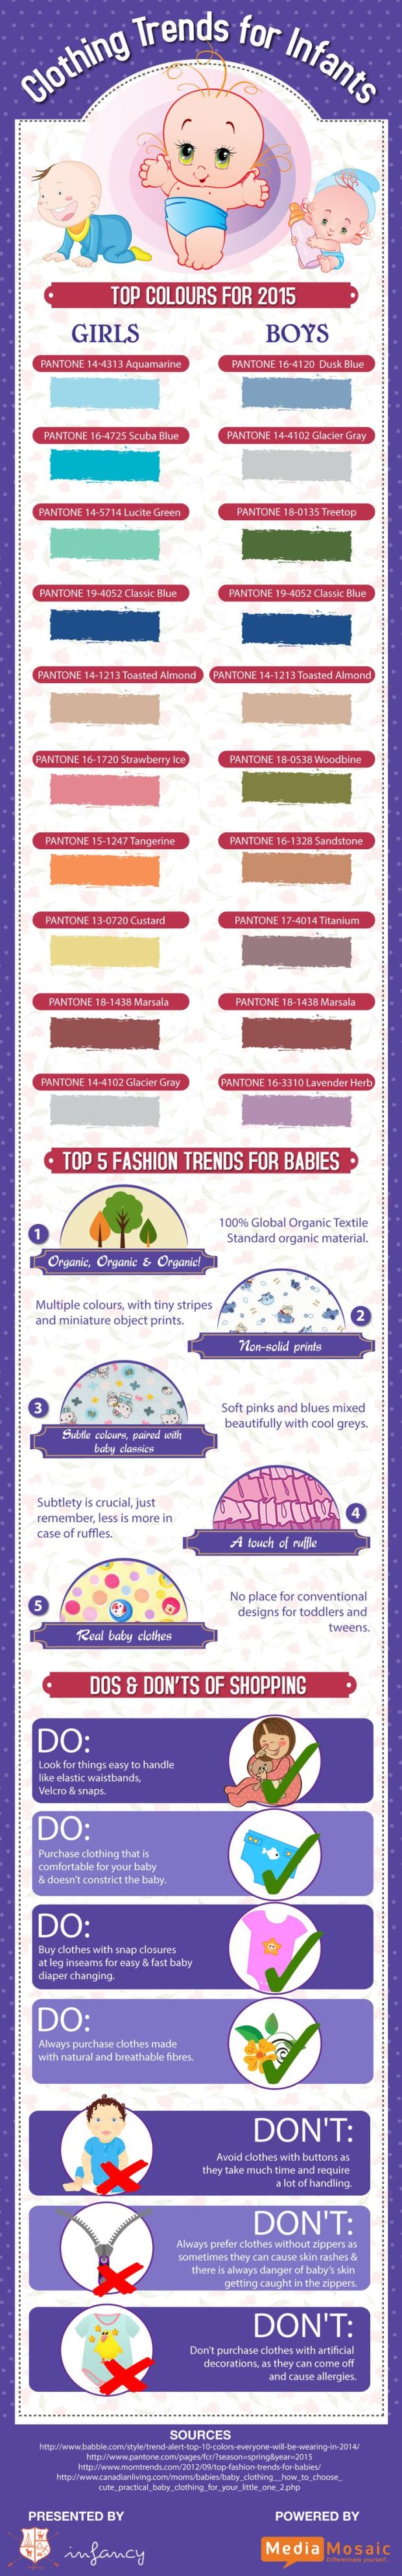 Clothing trends for infants